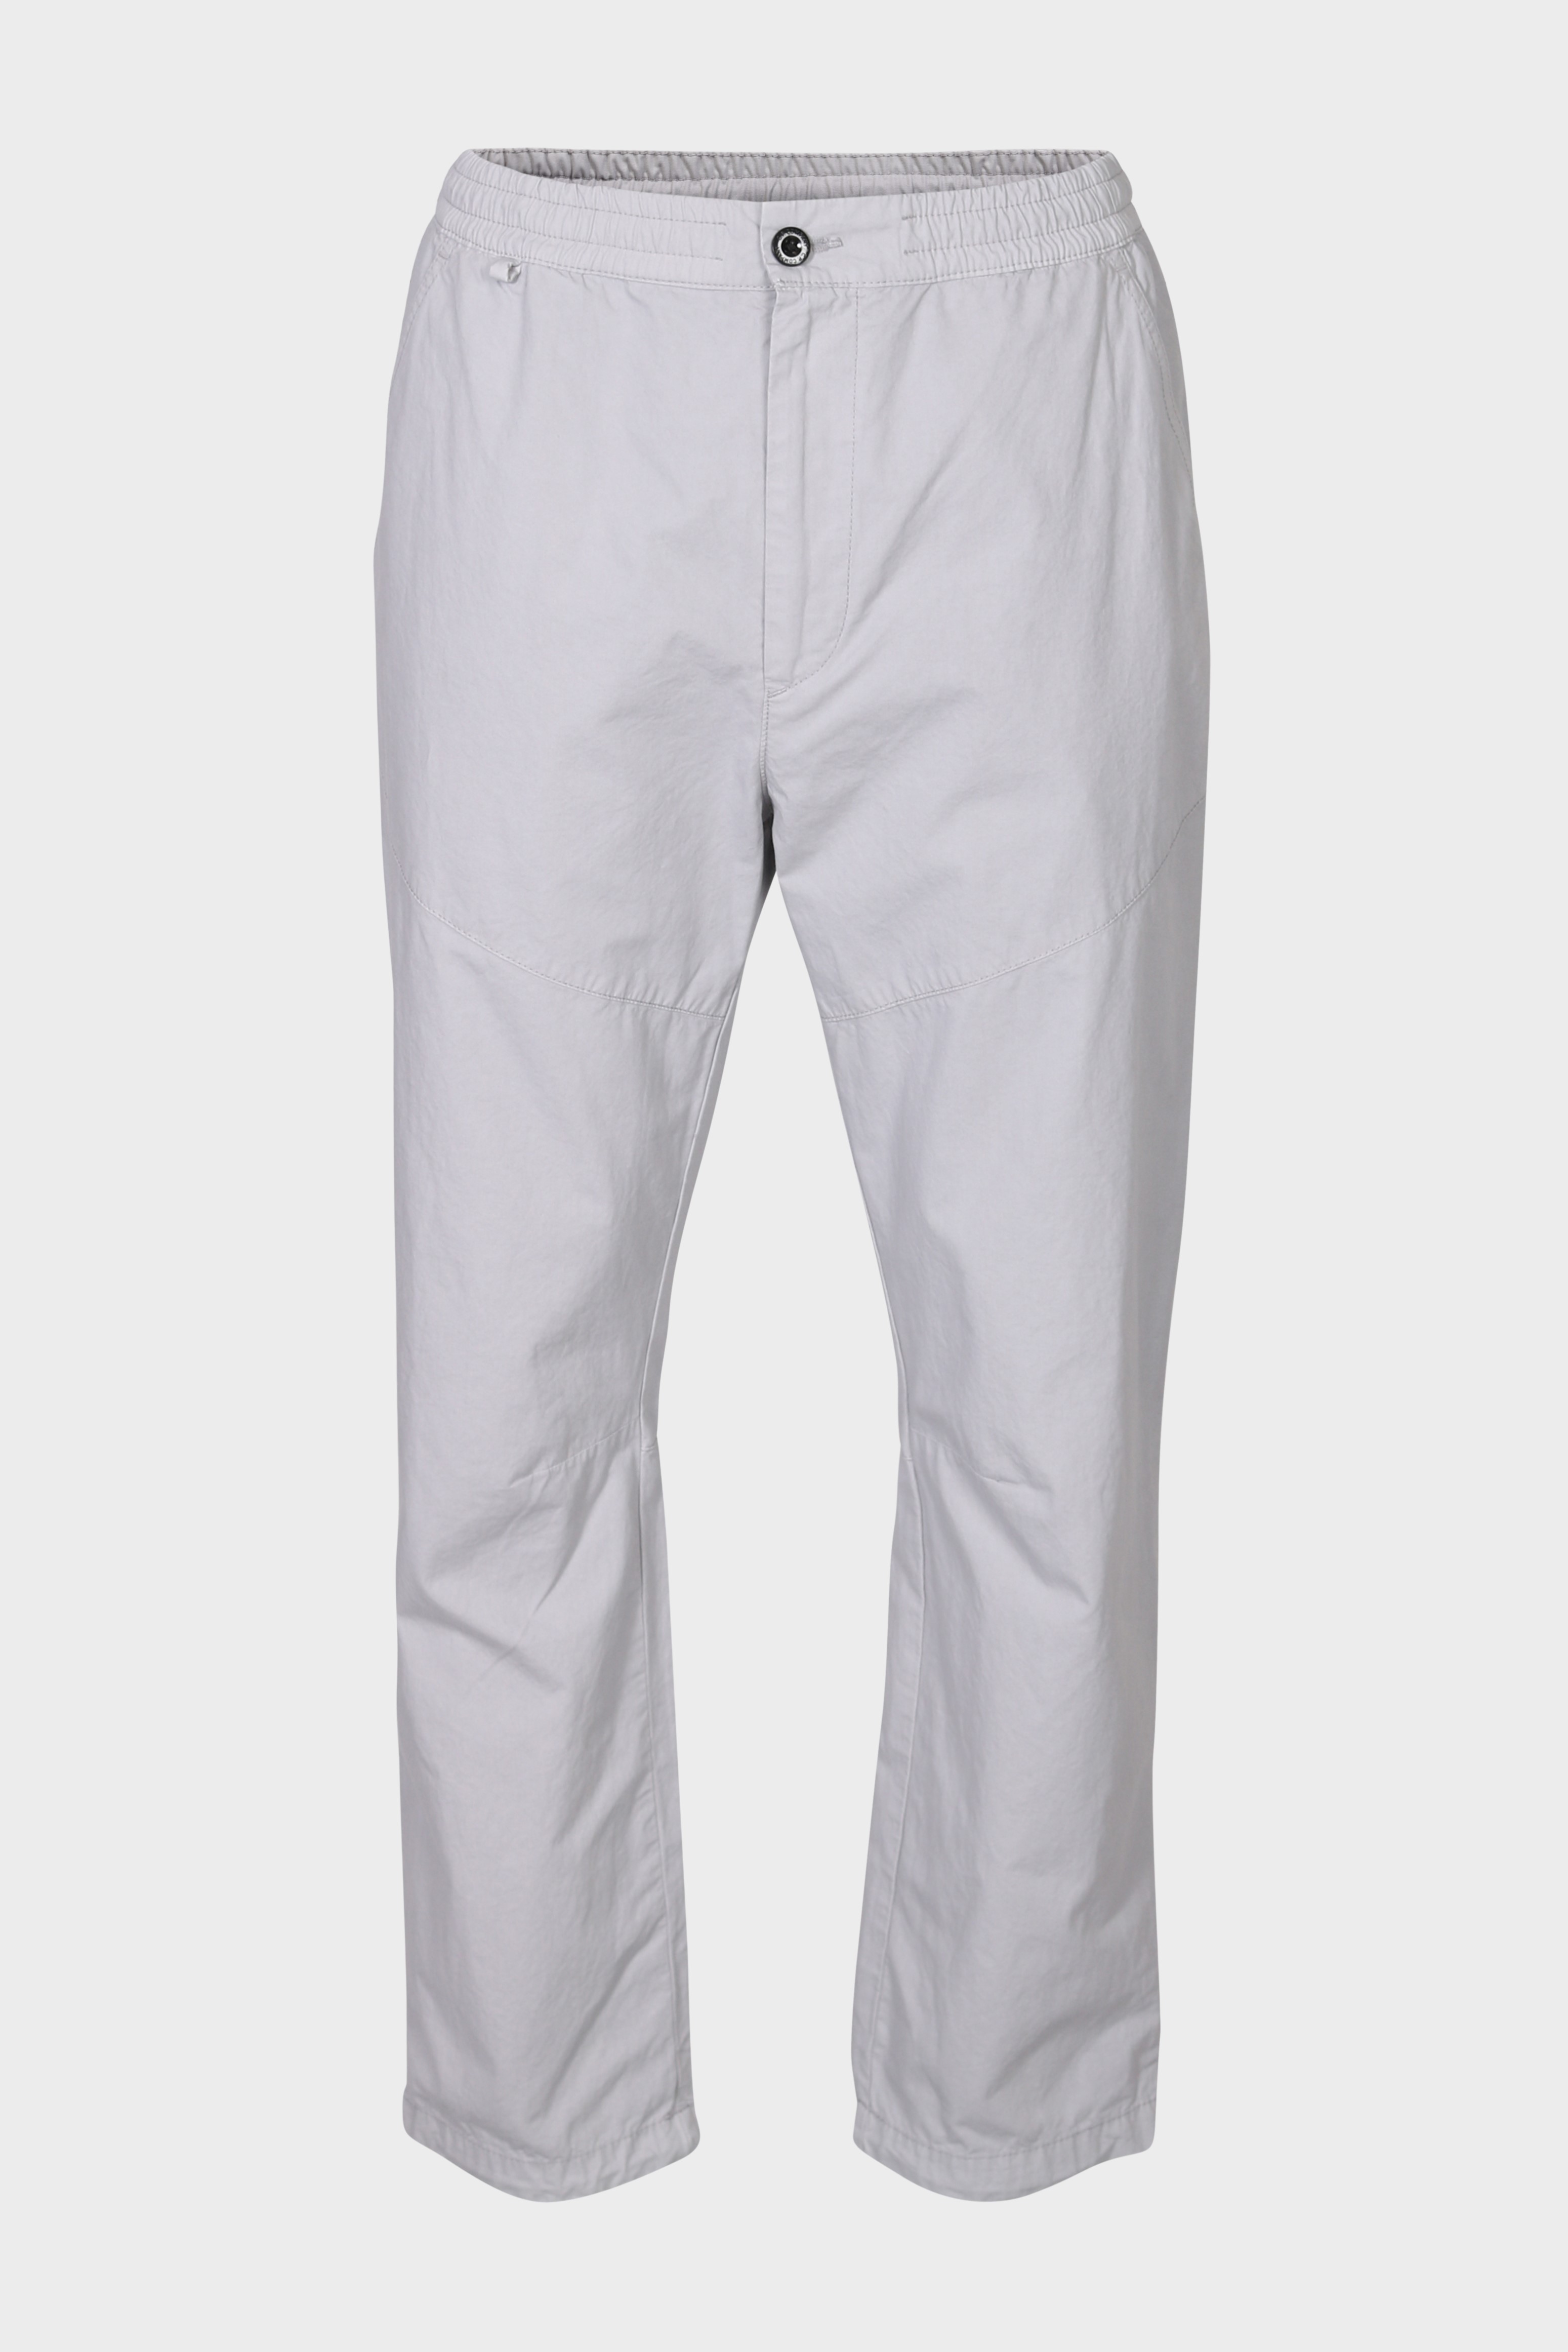 C.P. COMPANY Worker Pant in Drizzle Grey 46